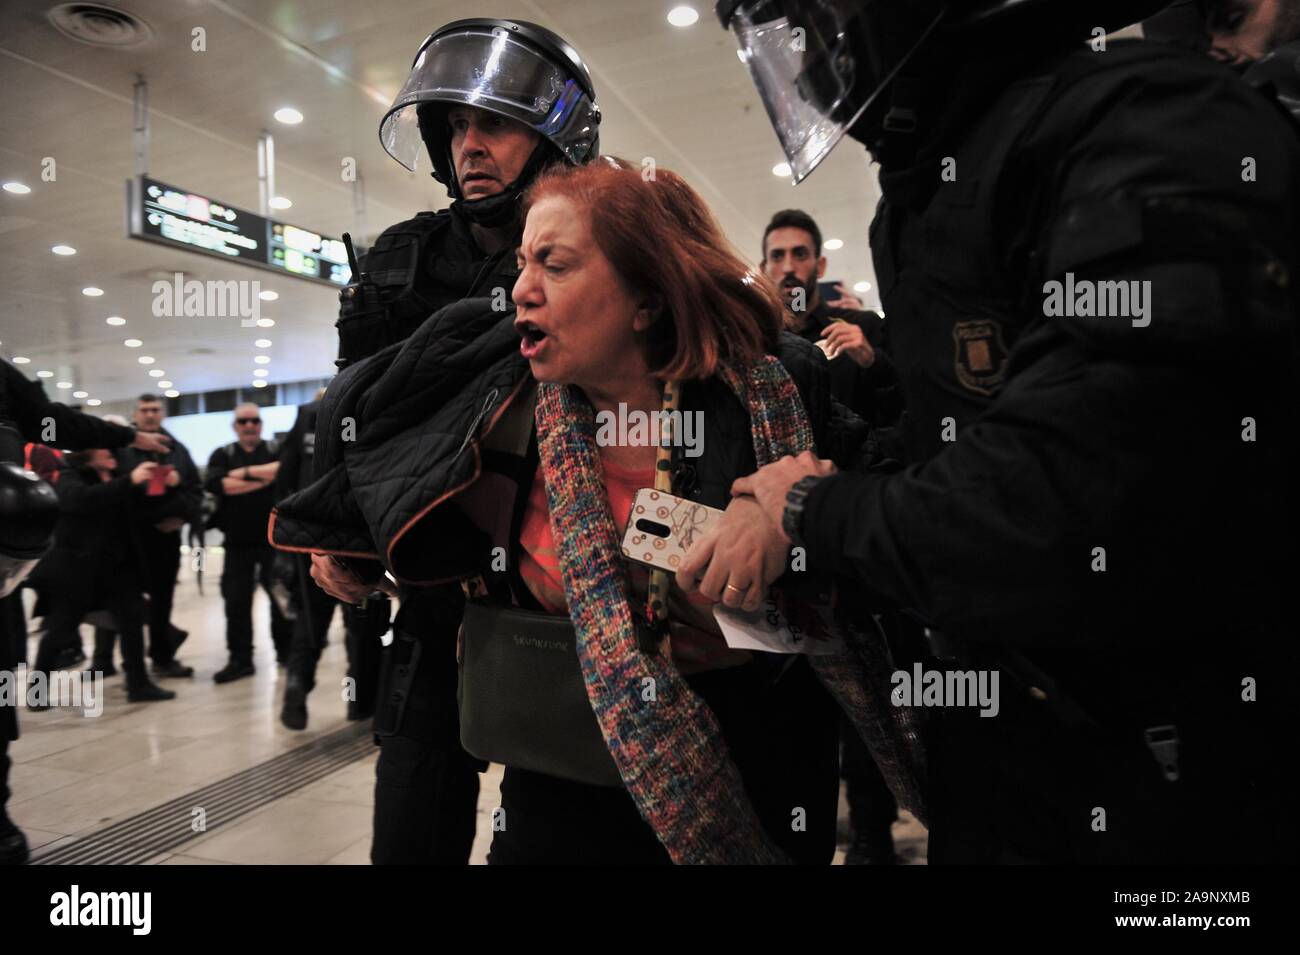 Barcelona, Spain. 16th Nov, 2019. Police arresting a woman during the demonstrations.Around 200 radical independents tried to block the central station of Sants in the city of Barcelona on the occasion of the Resolution of the Procés Judgment. They demand freedom of Catalonia political prisoners. The autonomous police of Catalonia called Mossos de Esquadra had to evict one by one. Credit: SOPA Images Limited/Alamy Live News Stock Photo